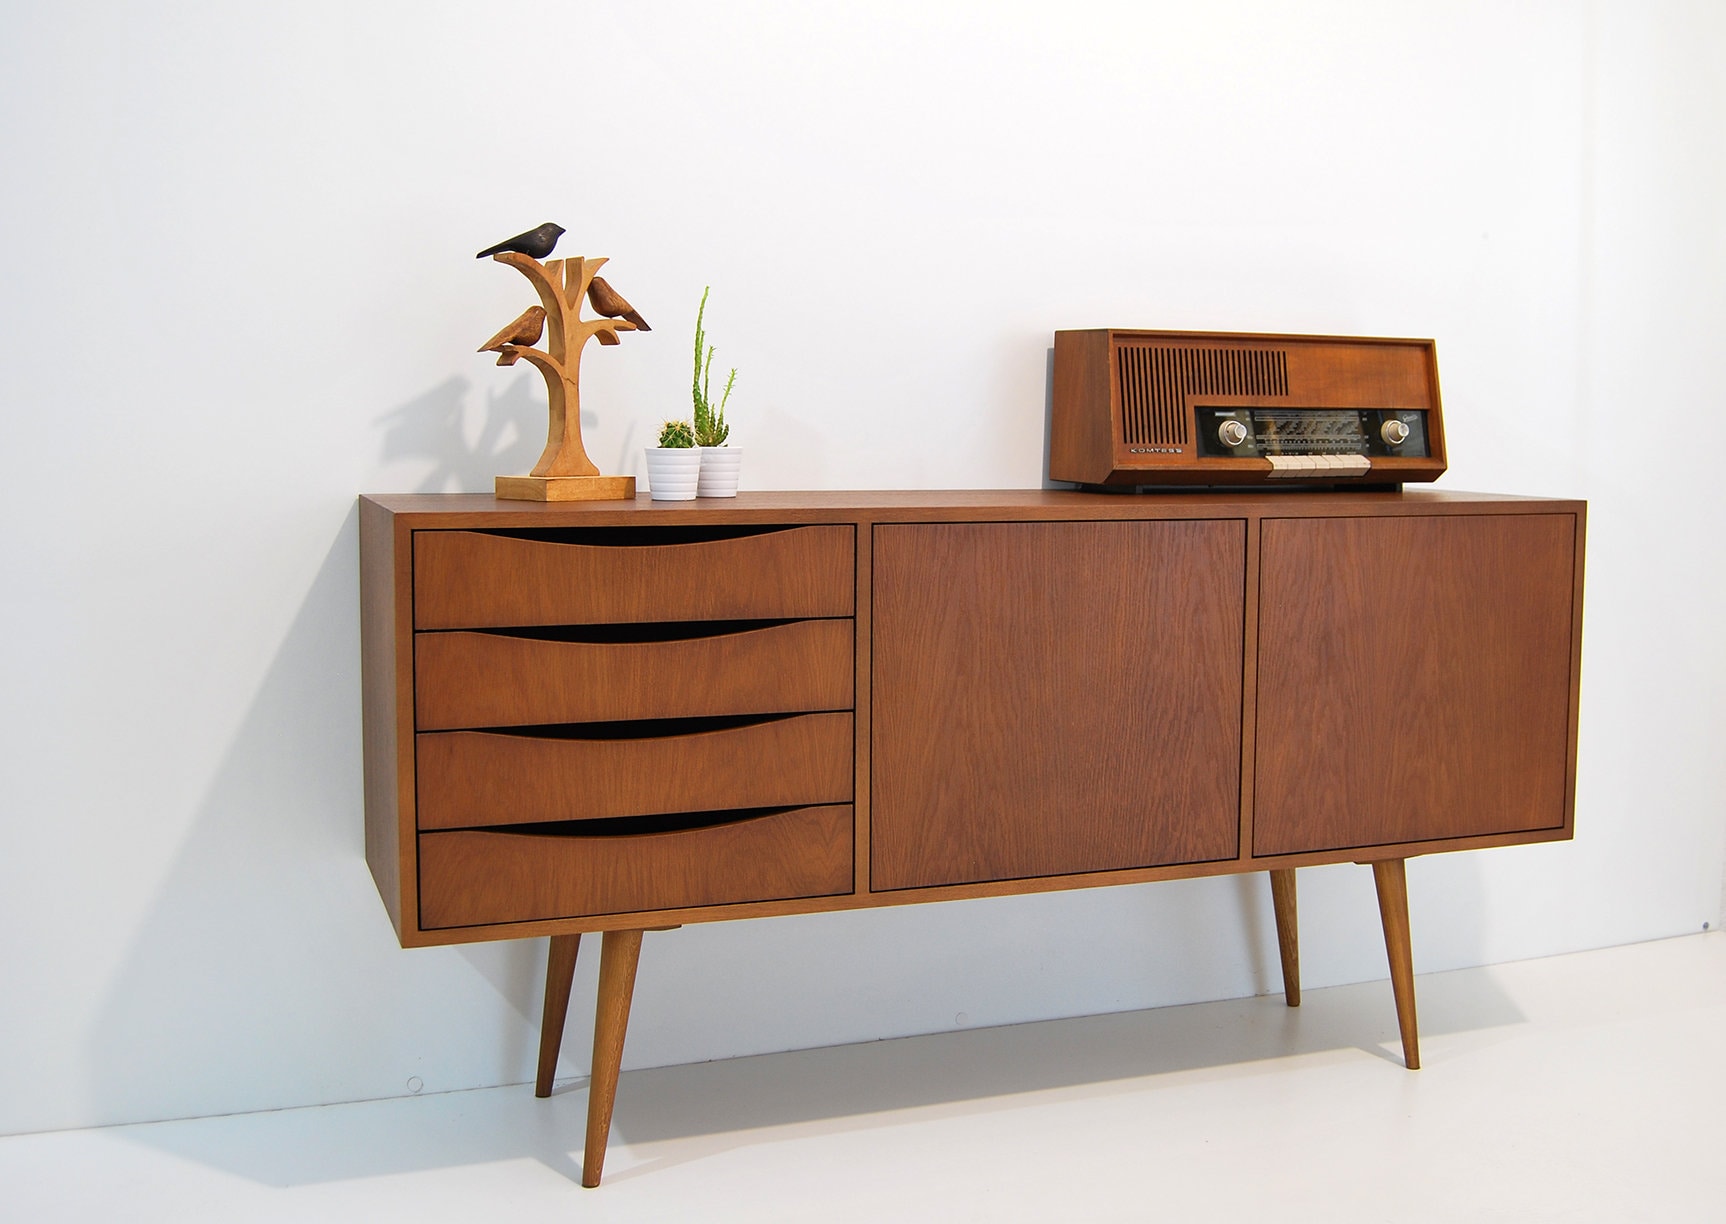 Sideboard Modern Mid-century / Living Room Furniture / Console With Drawers  / Vinyl Record LP Storage Unit / Scandinavian - Etsy